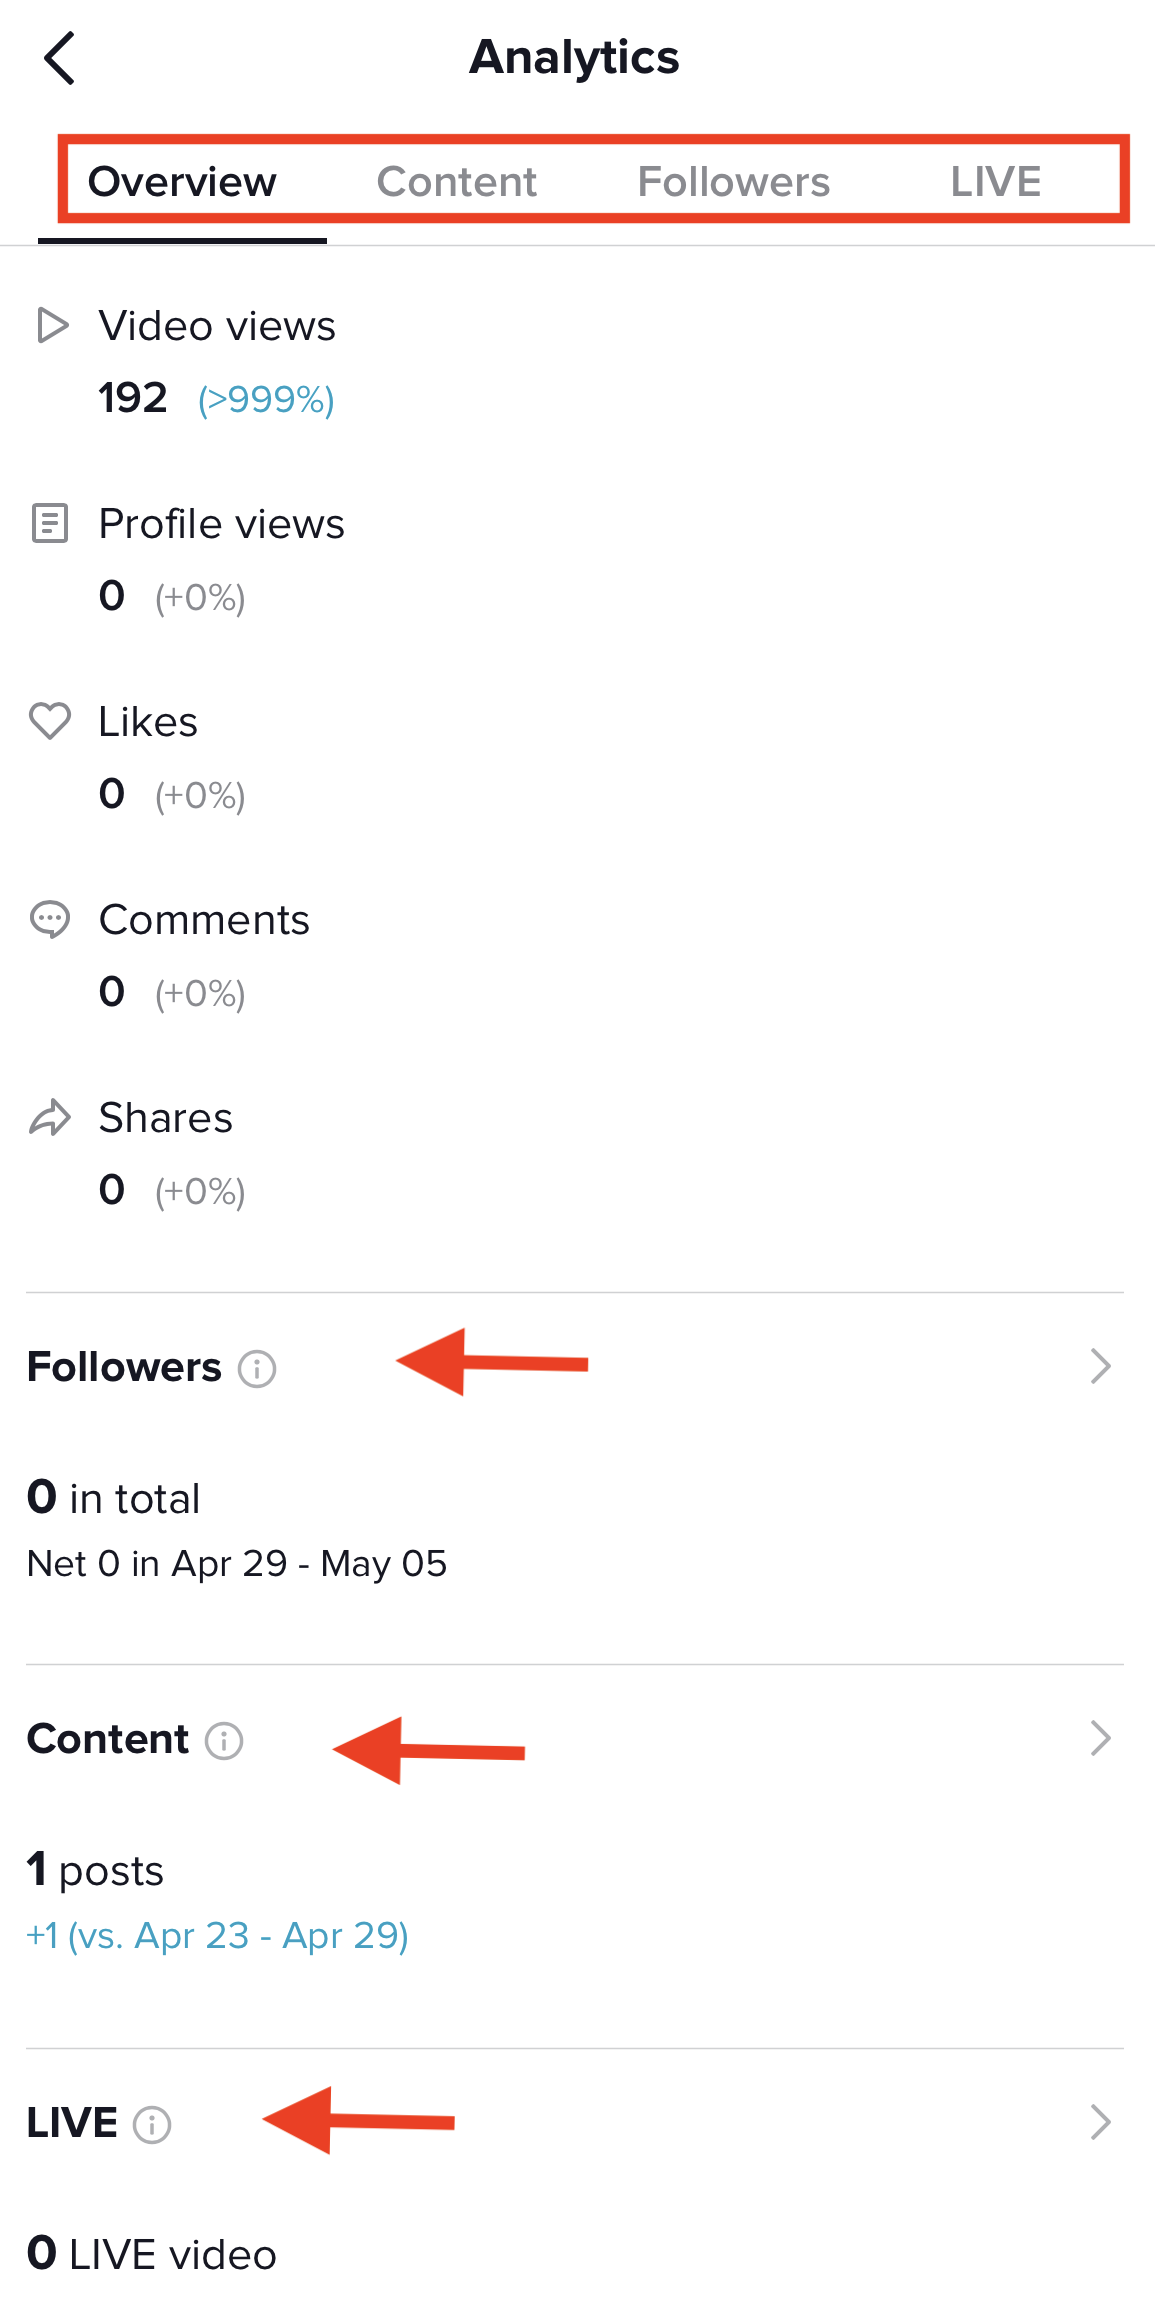 TikTok's four primary analytics sections: overview, content, followers and LIVE. The sub-categories are highlighted at the top with a red box. Red arrows point to the followers, content and LIVE sub-categories for emphasis as well. 